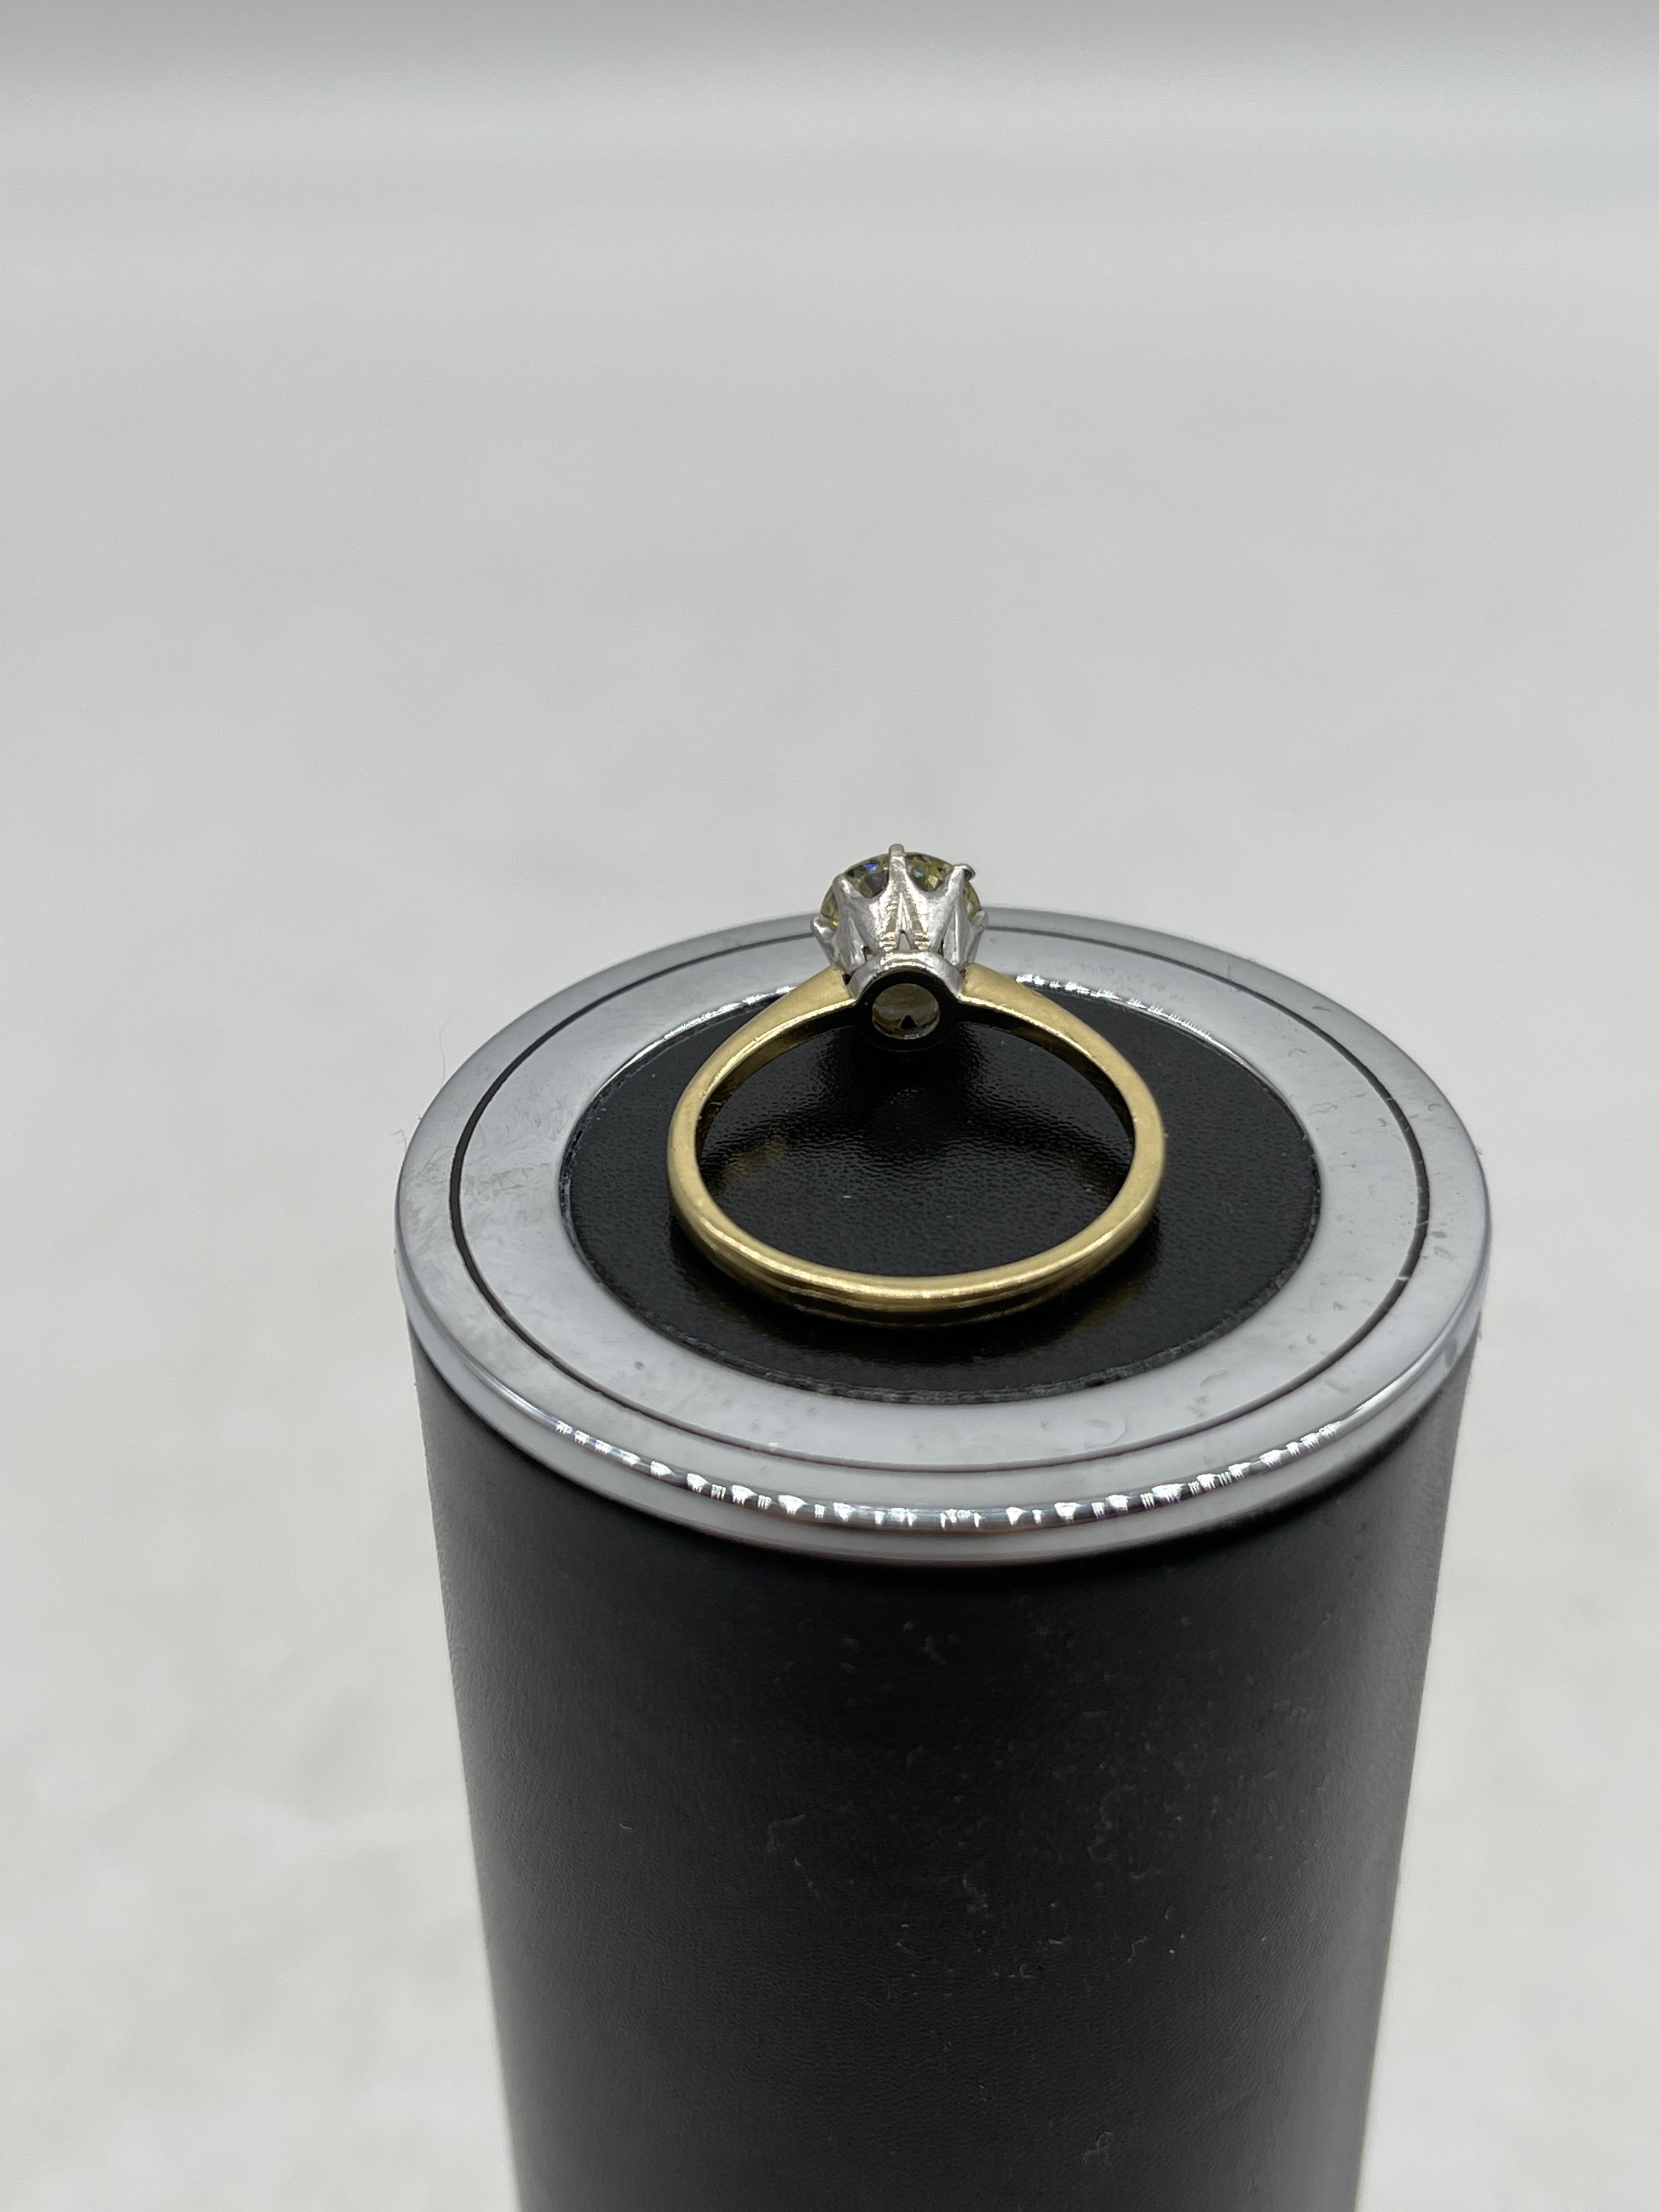 18ct 1ct Solitaire hallmarked Diamond Ring - Image 3 of 7